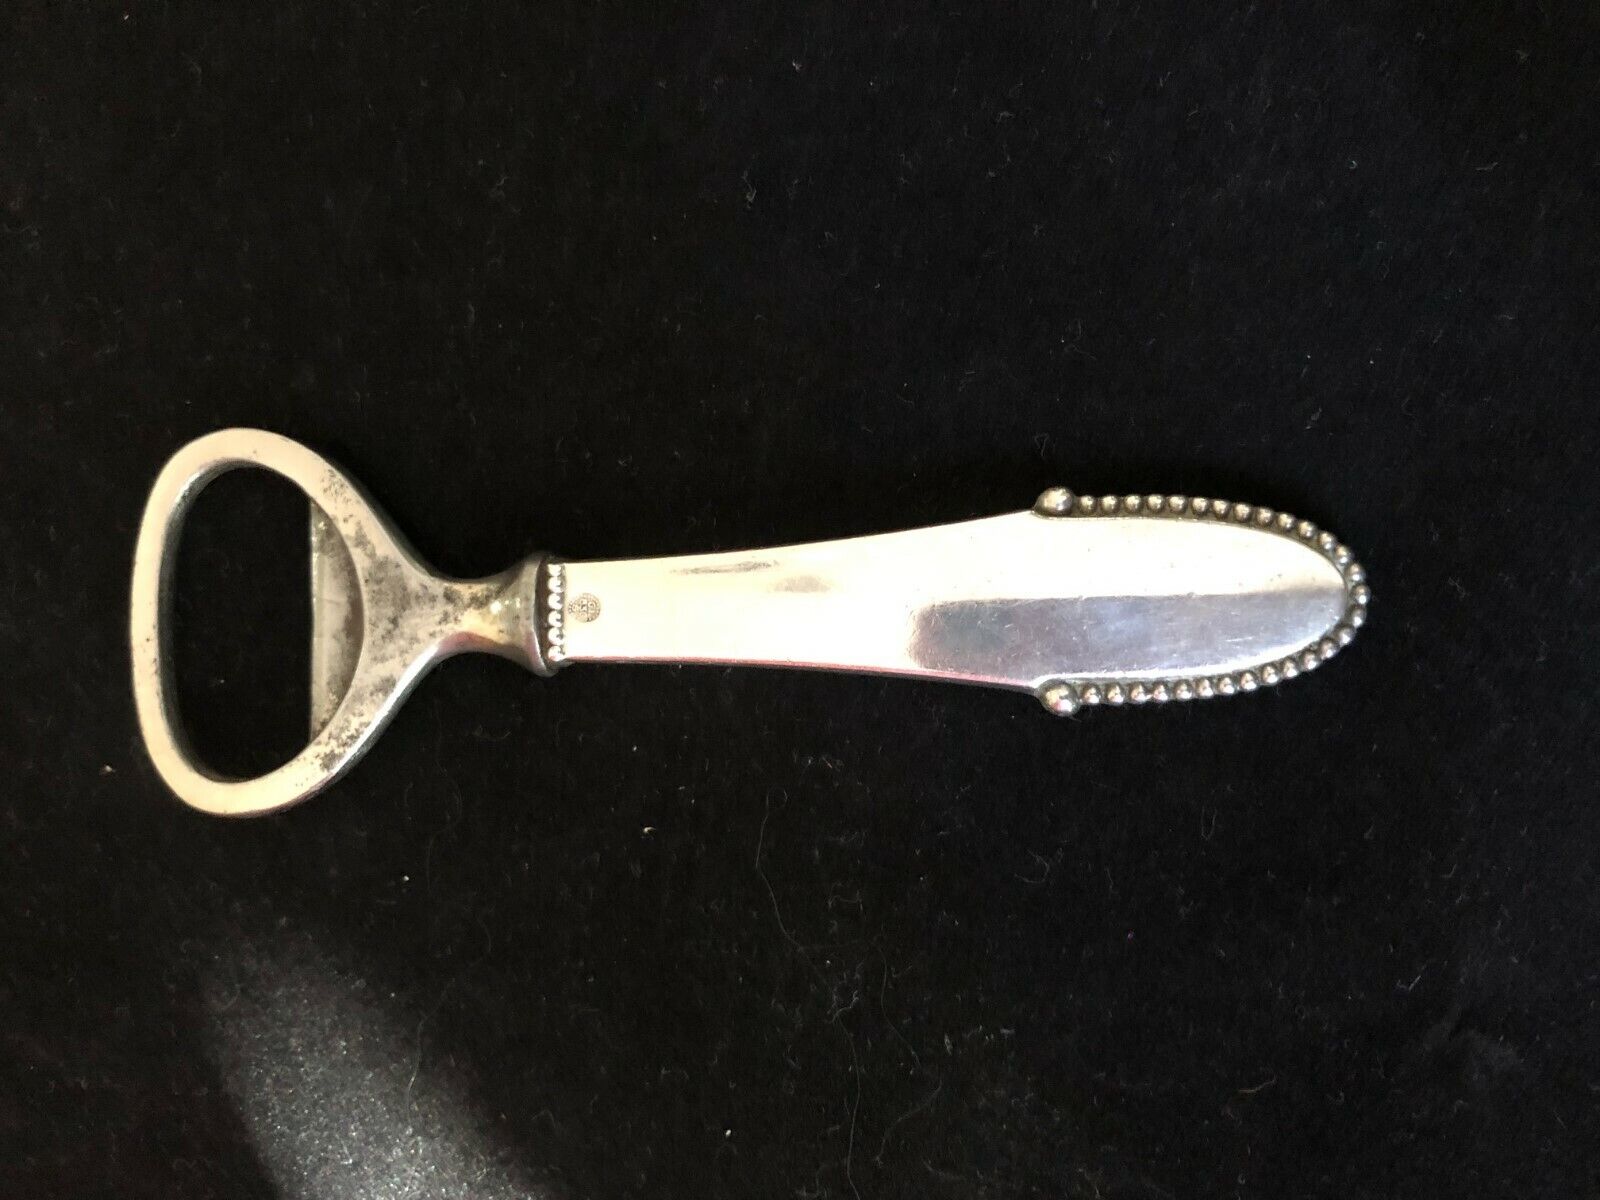 Antique Valuations: Rare Georg Jensen Sterling Silver Bottle Opener - Beaded 1920s stamped